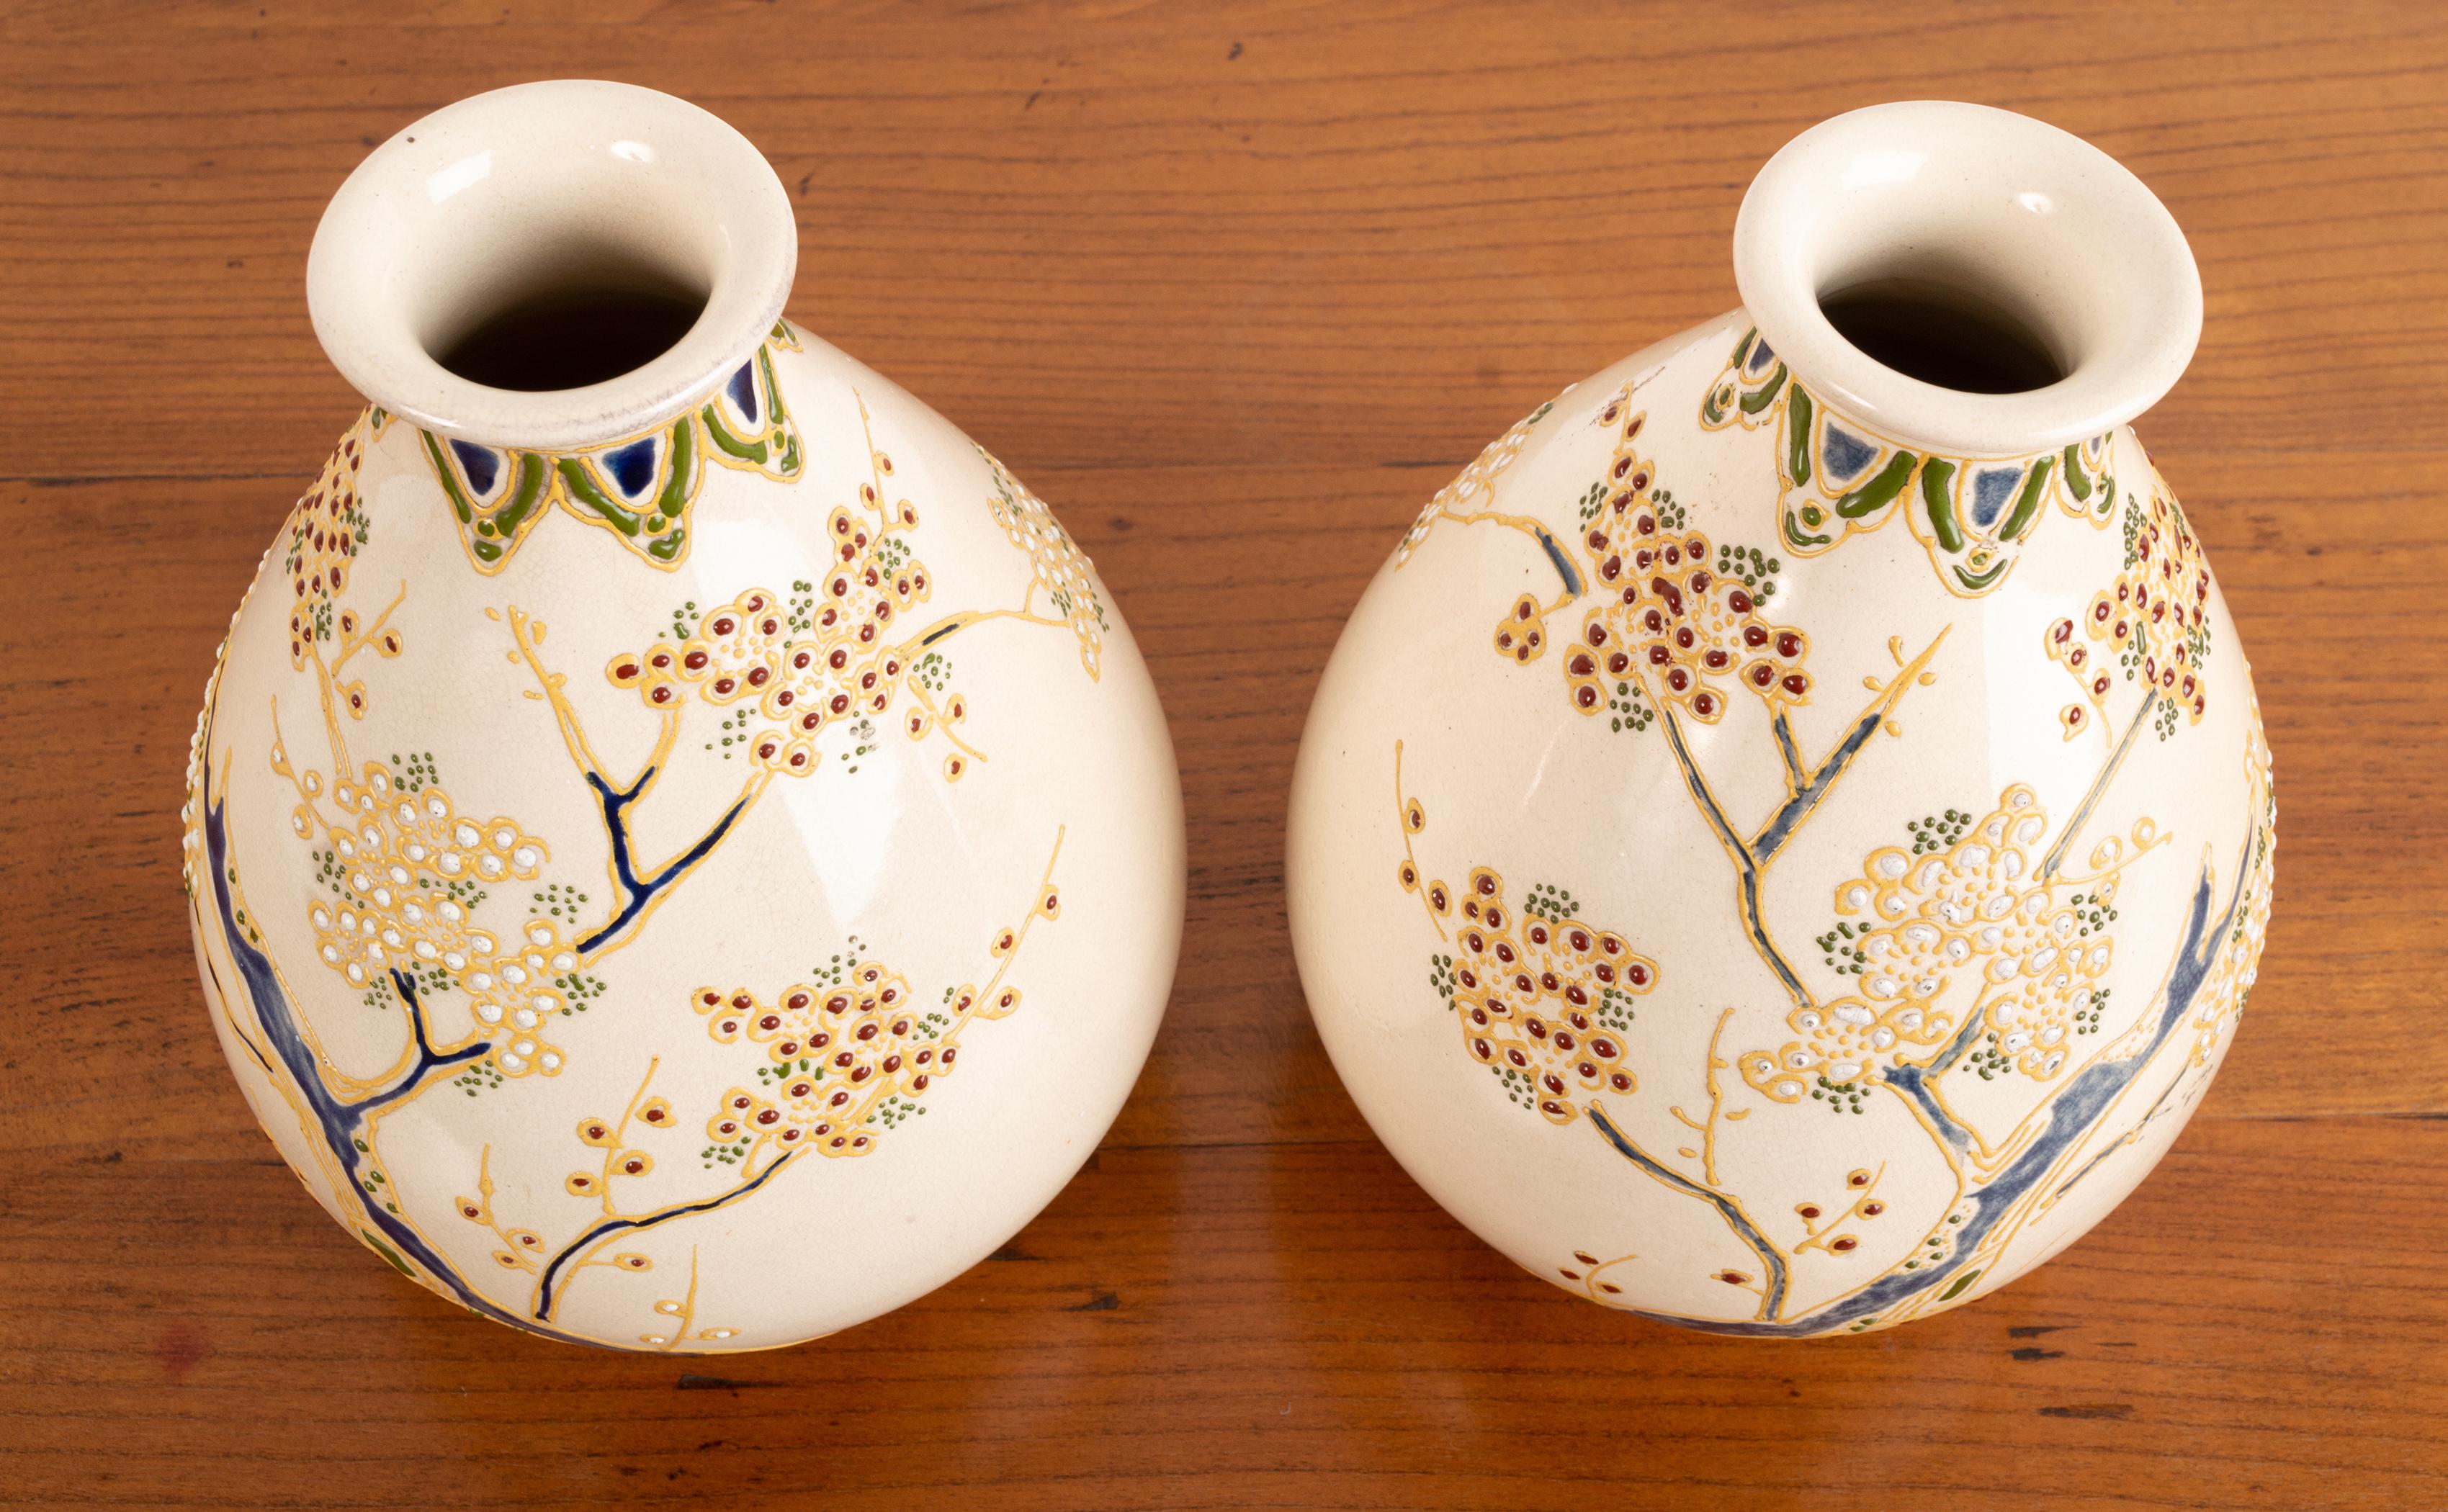 A pair Japanese export vases 
Japan C.1900 
Stamped 'Nippon'

A beautiful pair of delicately designed earthenware vases of Western taste depicting a hand-painted botanical pattern.

In excellent condition commensurate of age. Free from chips